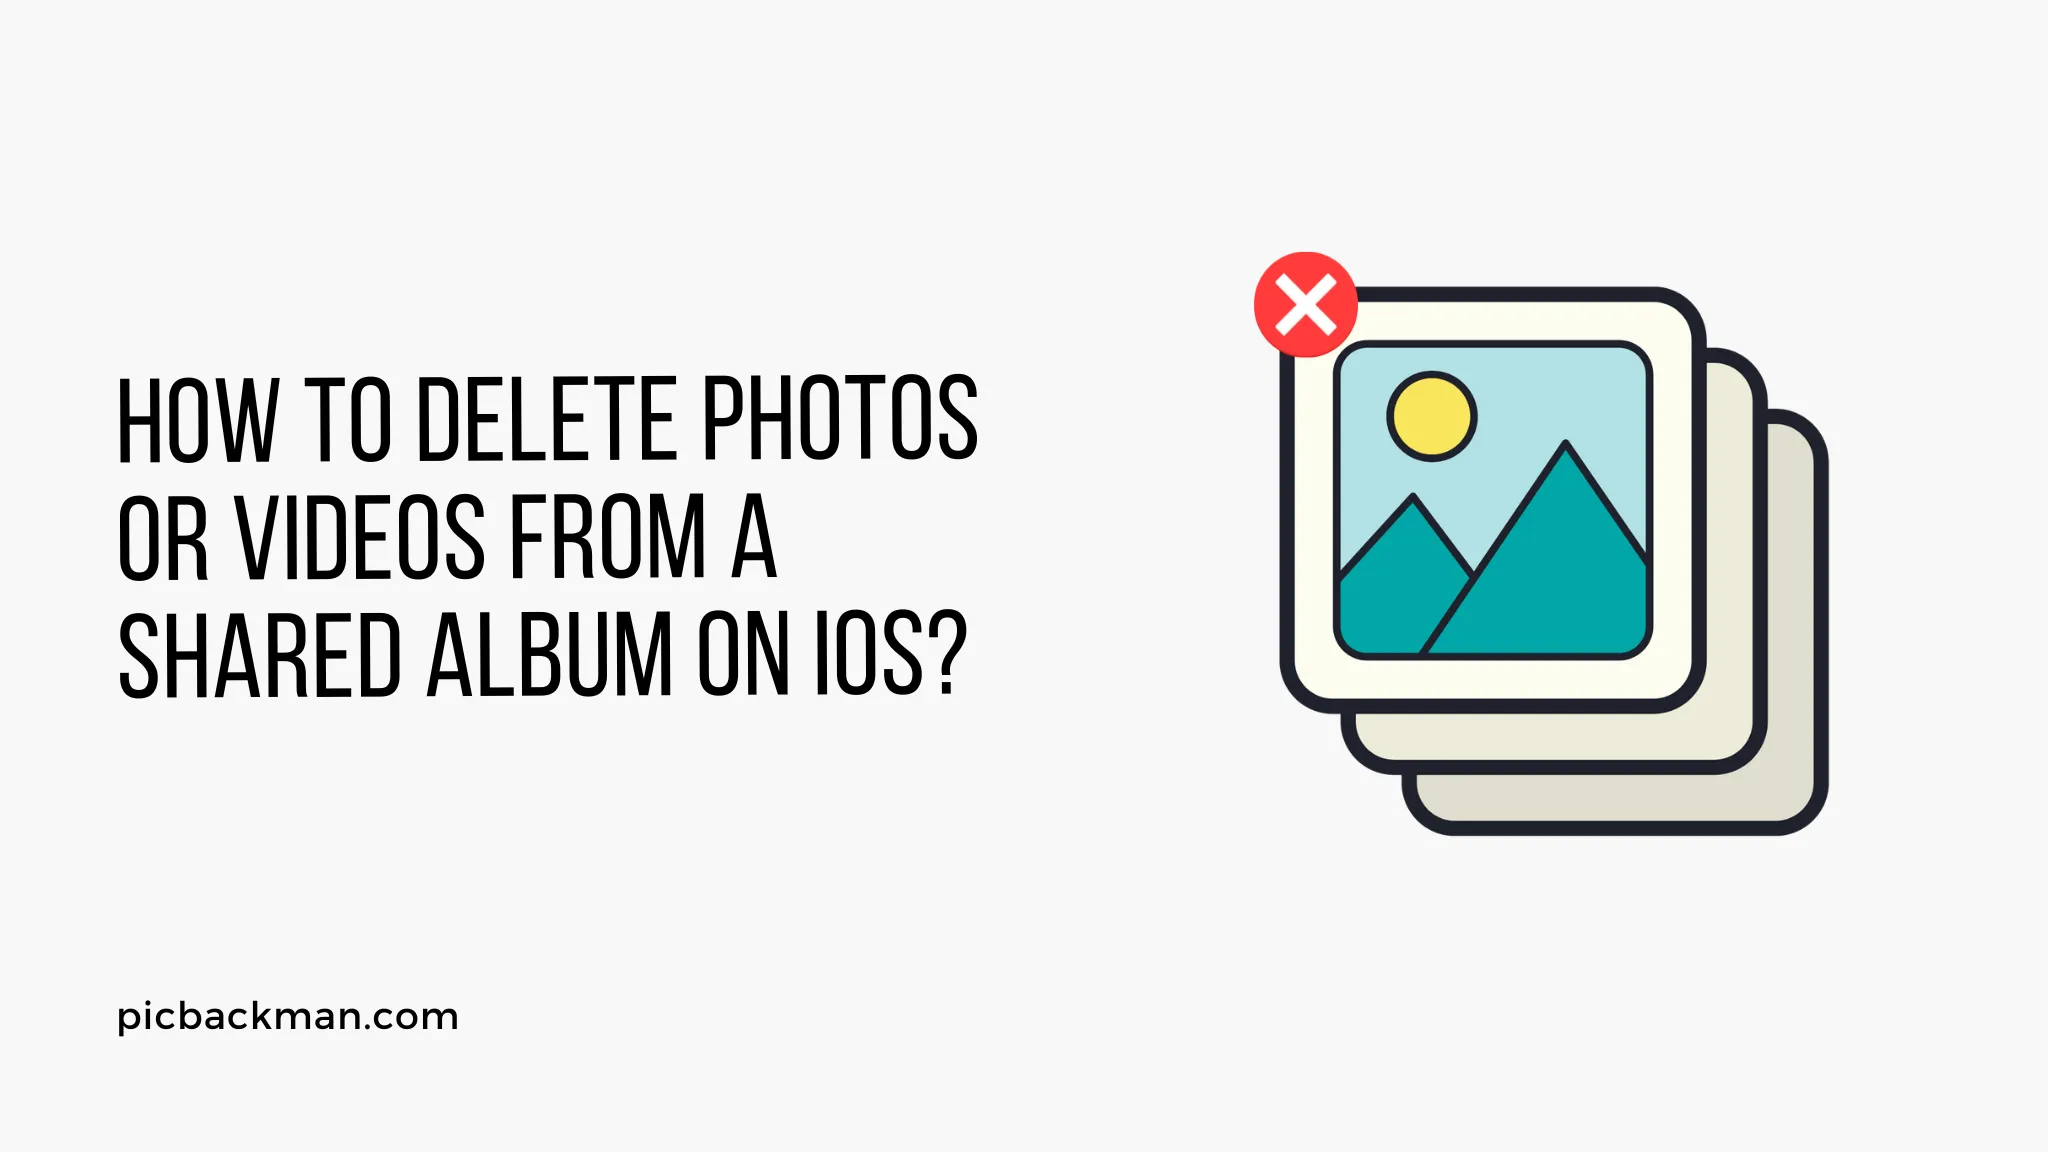 How to Delete Photos or Videos from a Shared Album on iOS